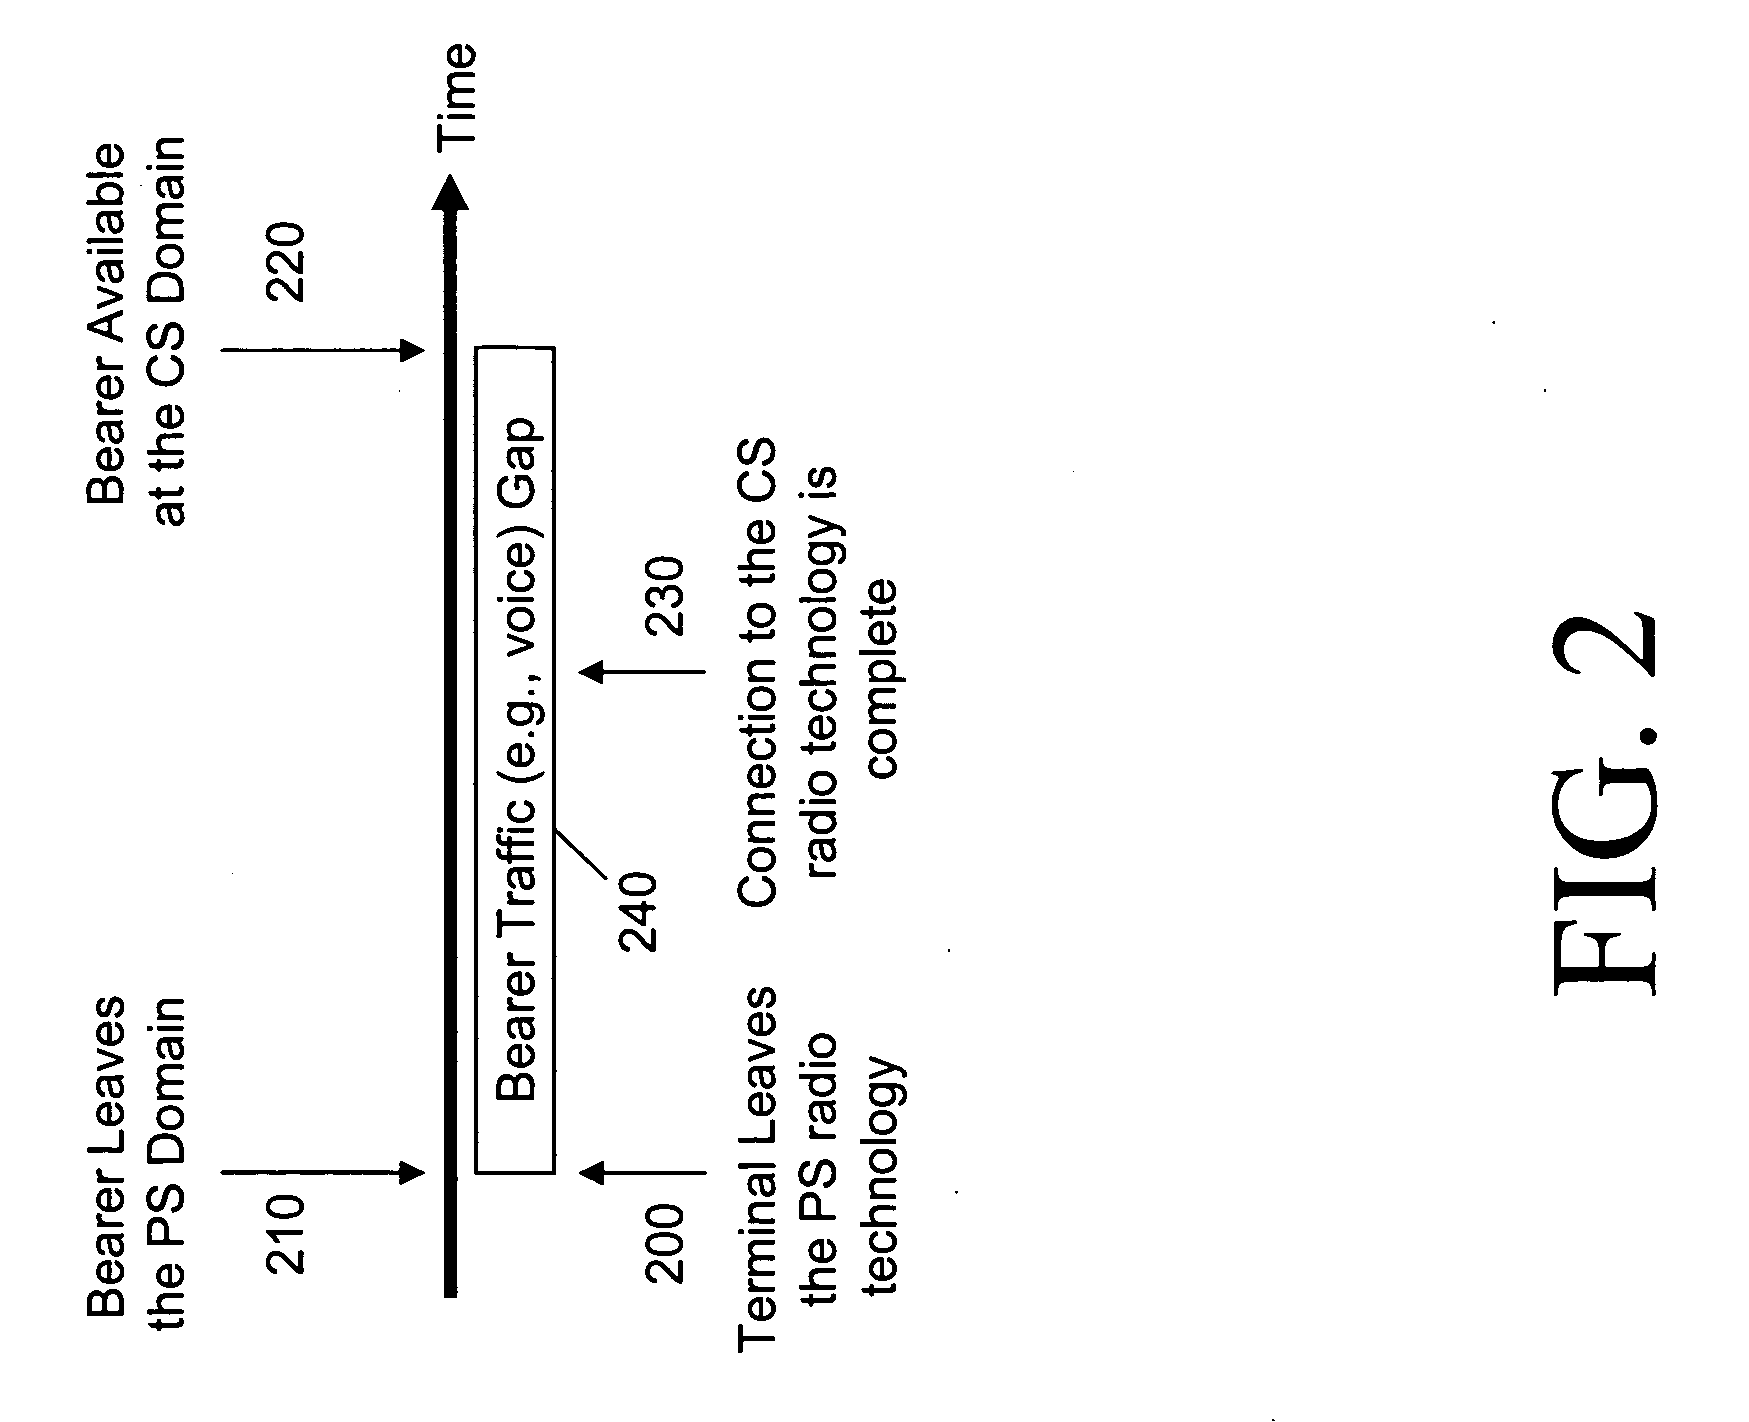 Method to improve the performance of handoffs between packet switched and circuit switched domains